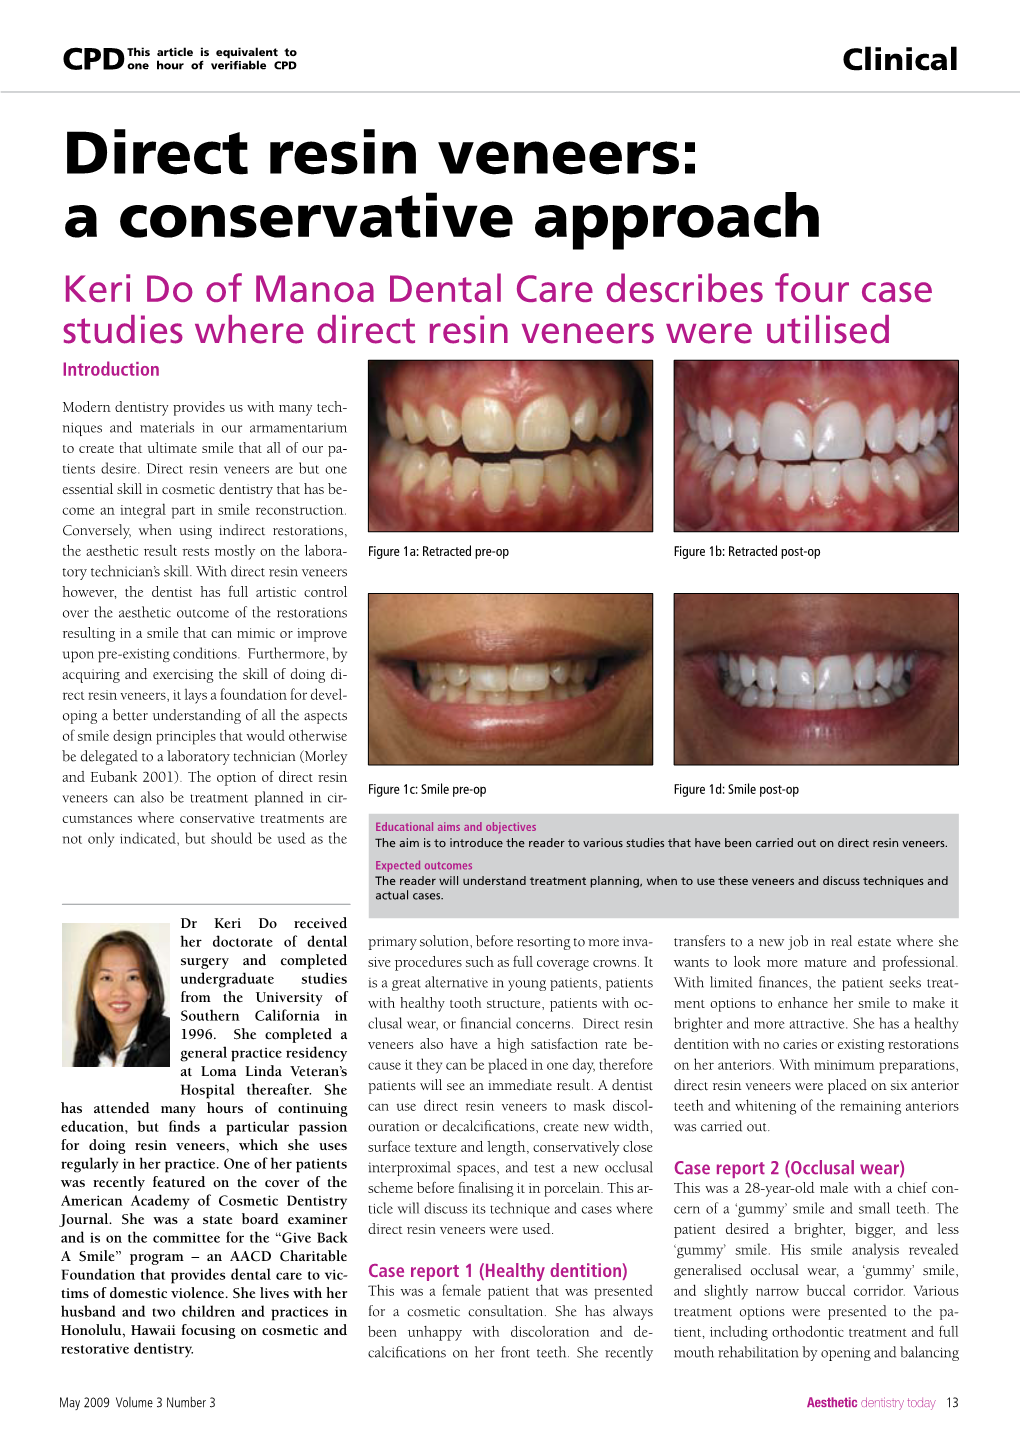 Direct Resin Veneers: a Conservative Approach Keri Do of Manoa Dental Care Describes Four Case Studies Where Direct Resin Veneers Were Utilised Introduction